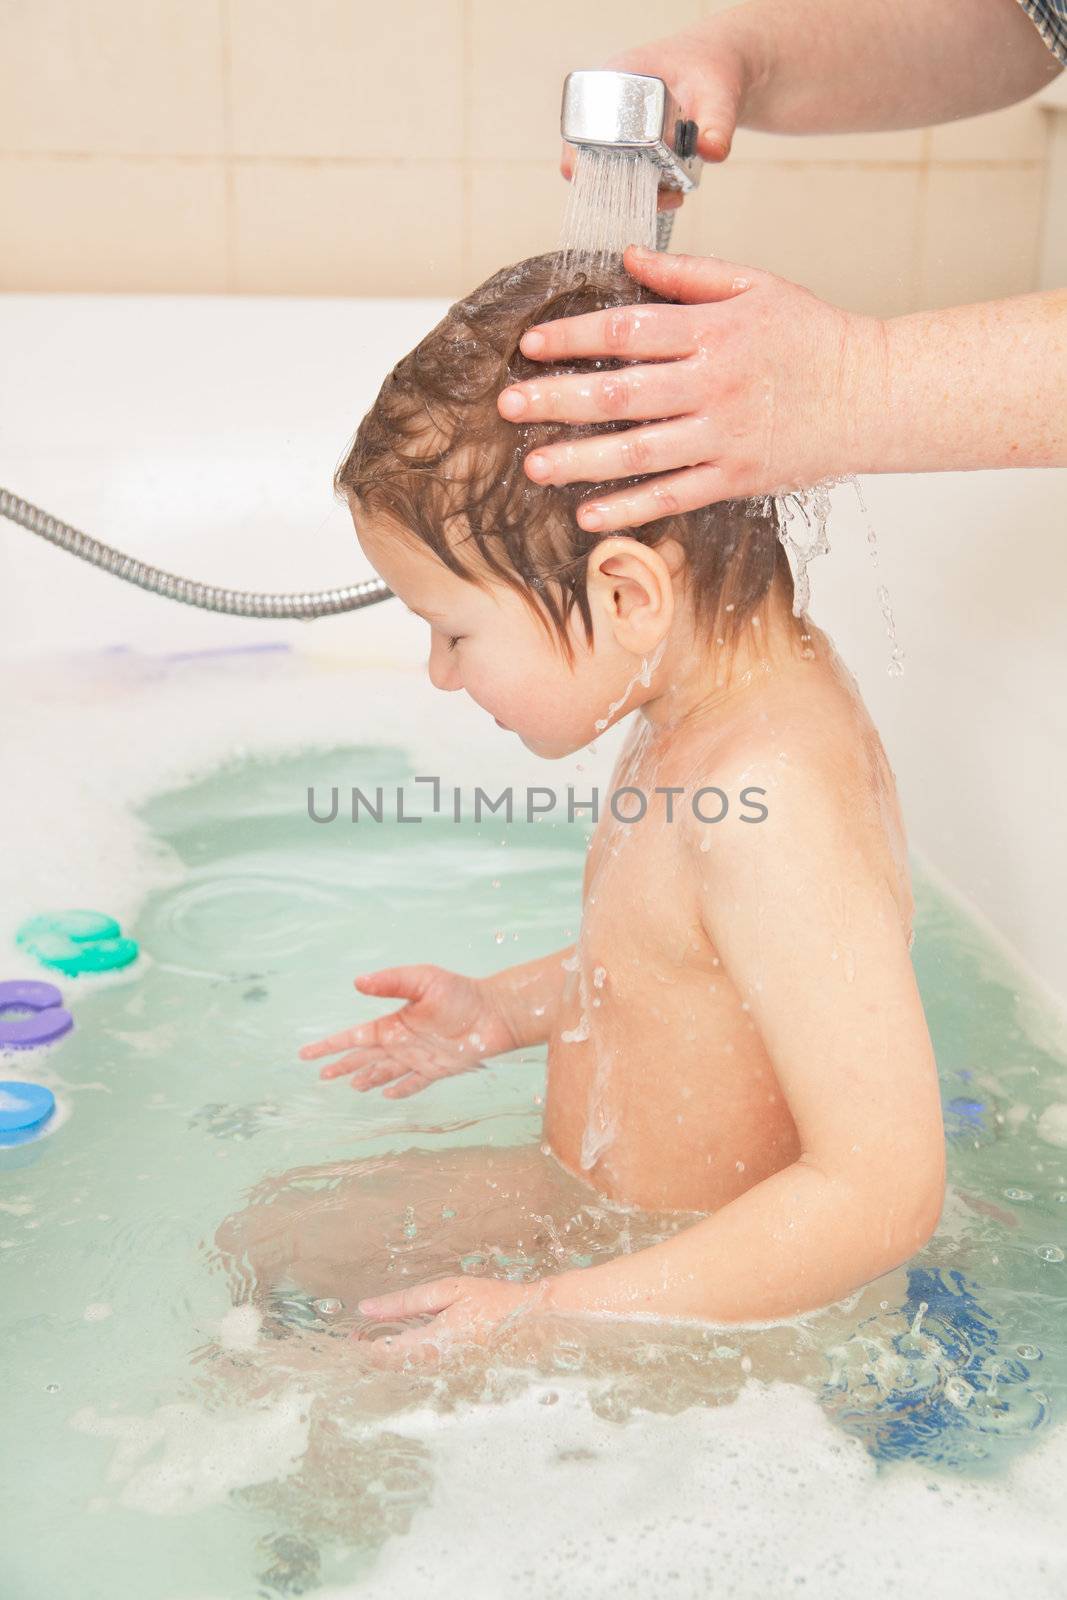 Little boy taking bath, hands of his mother washing his head